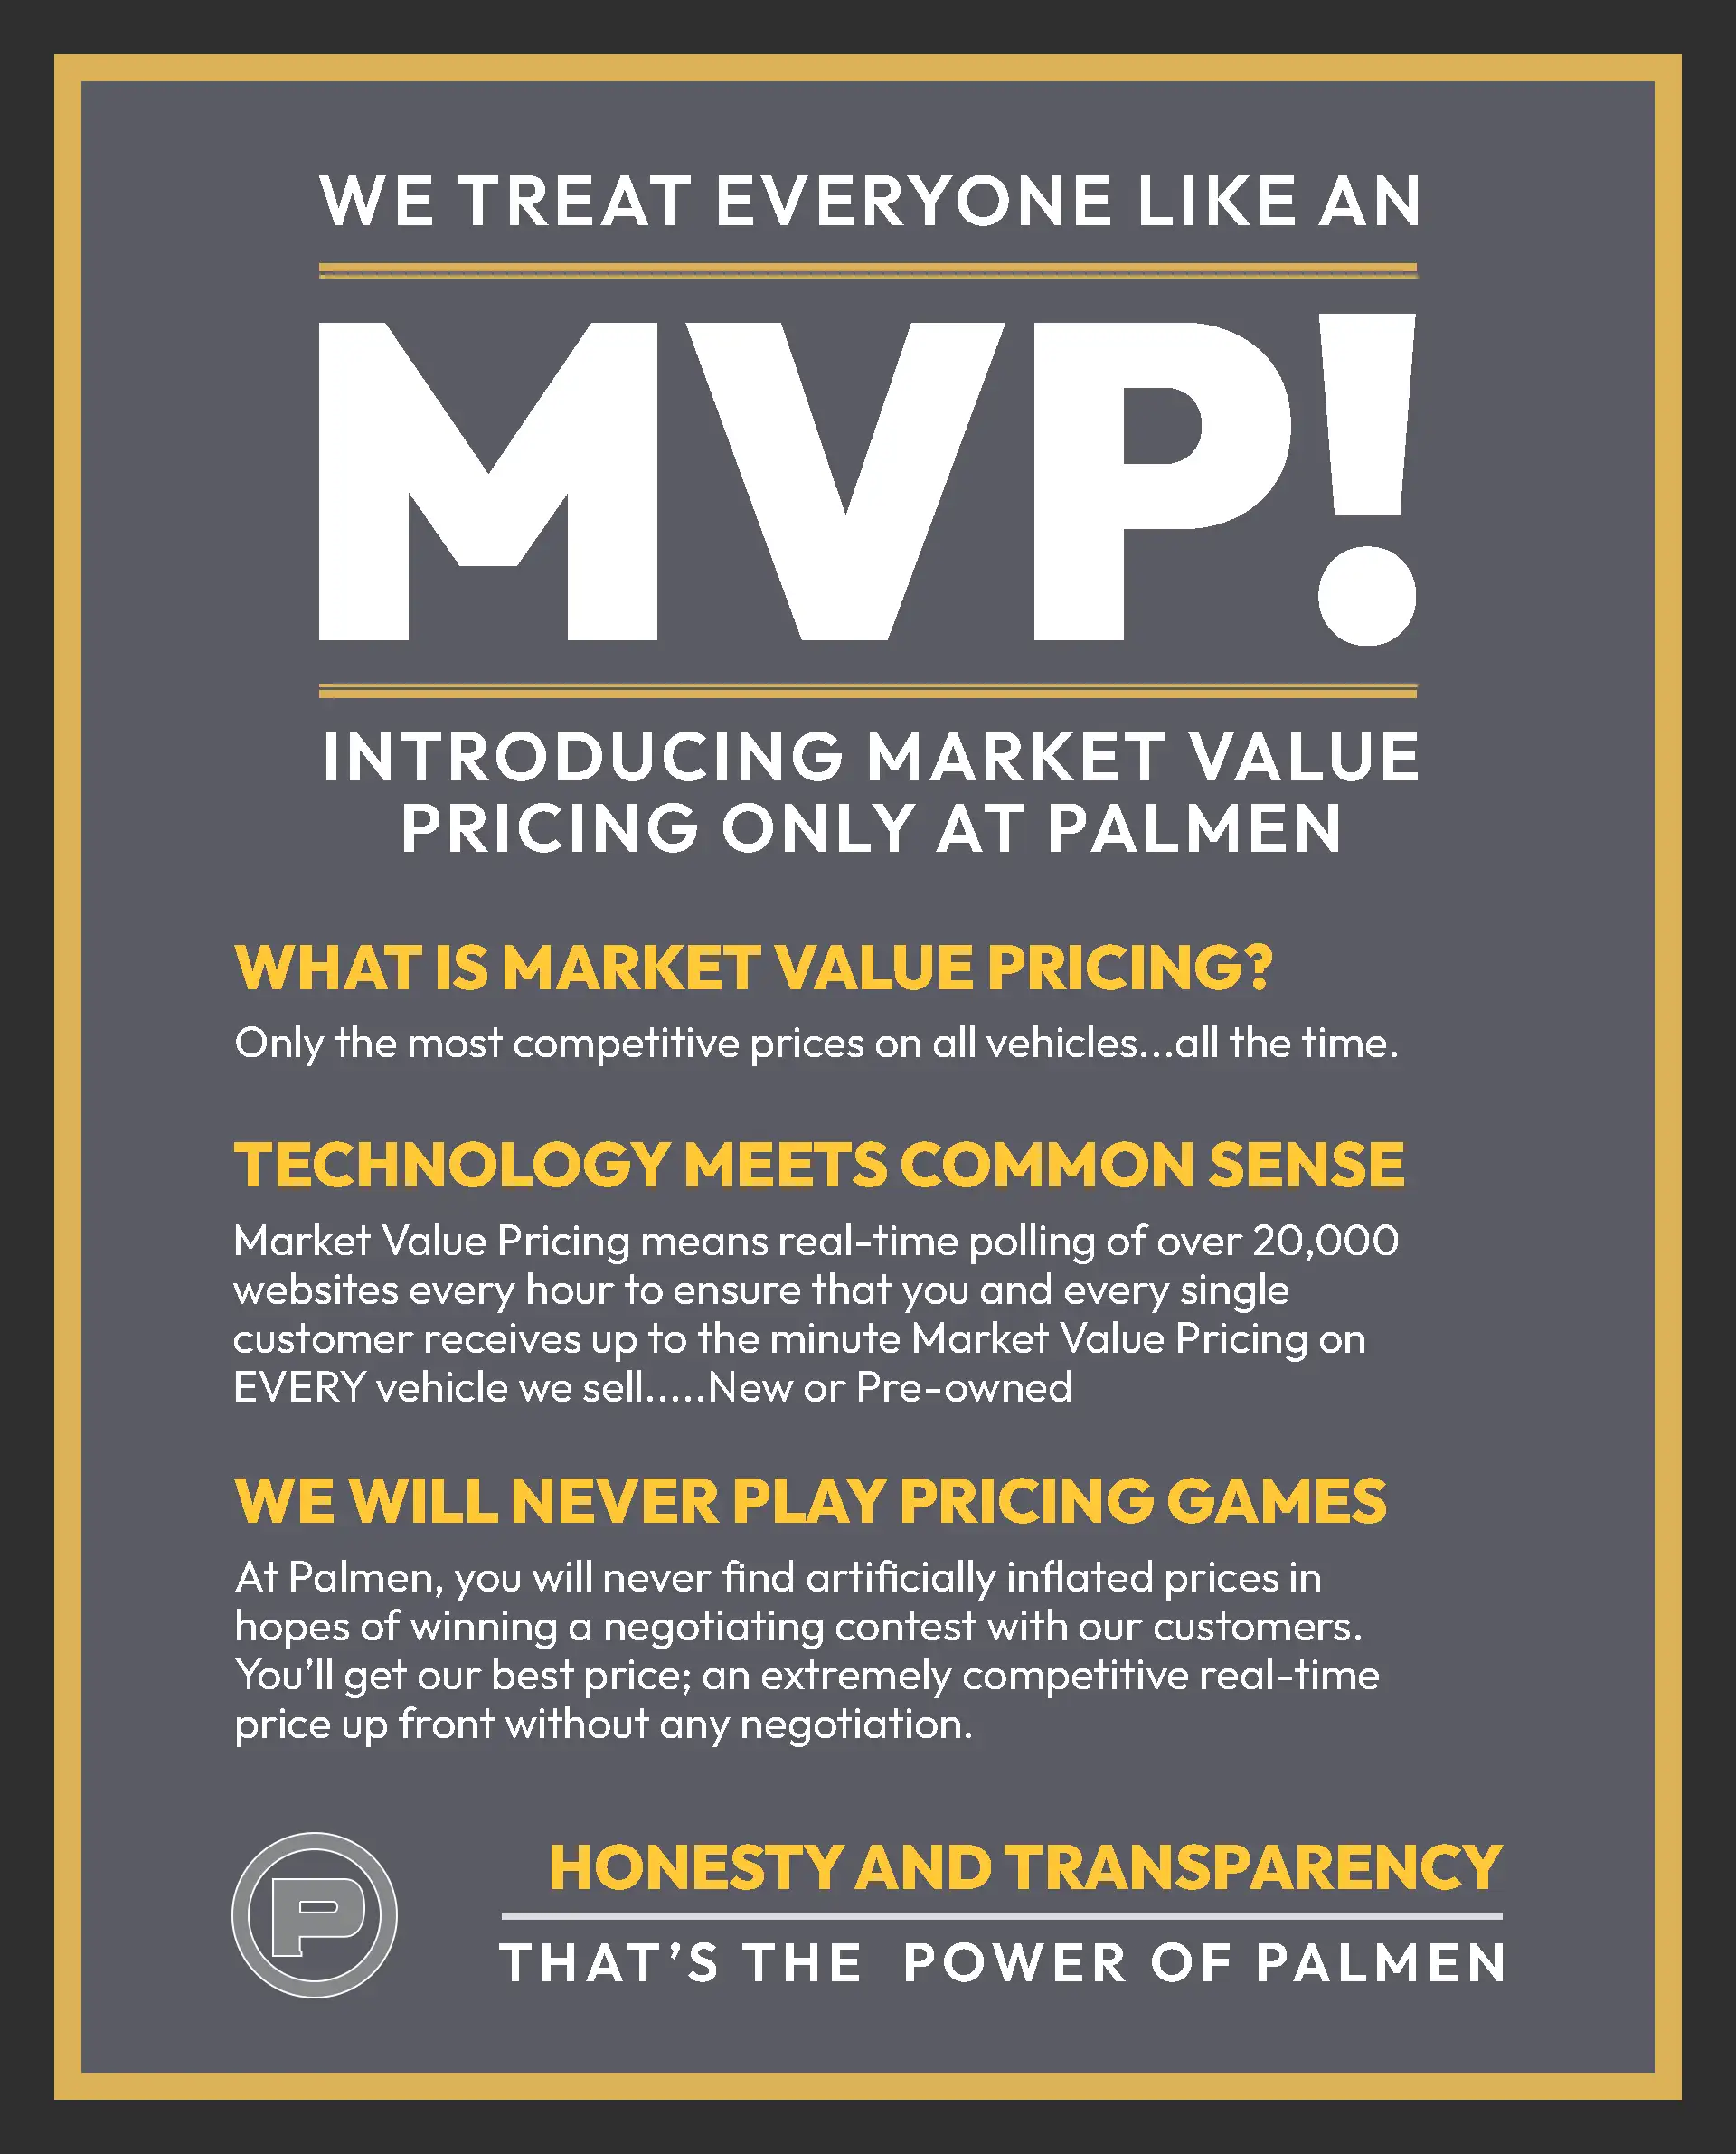 We treat everyone like an MVP. INtroducing market value pricing only at Palmen Motors CDJR. Only the most competitive pricing on all vehicles updated hourly from over 20,000 websites